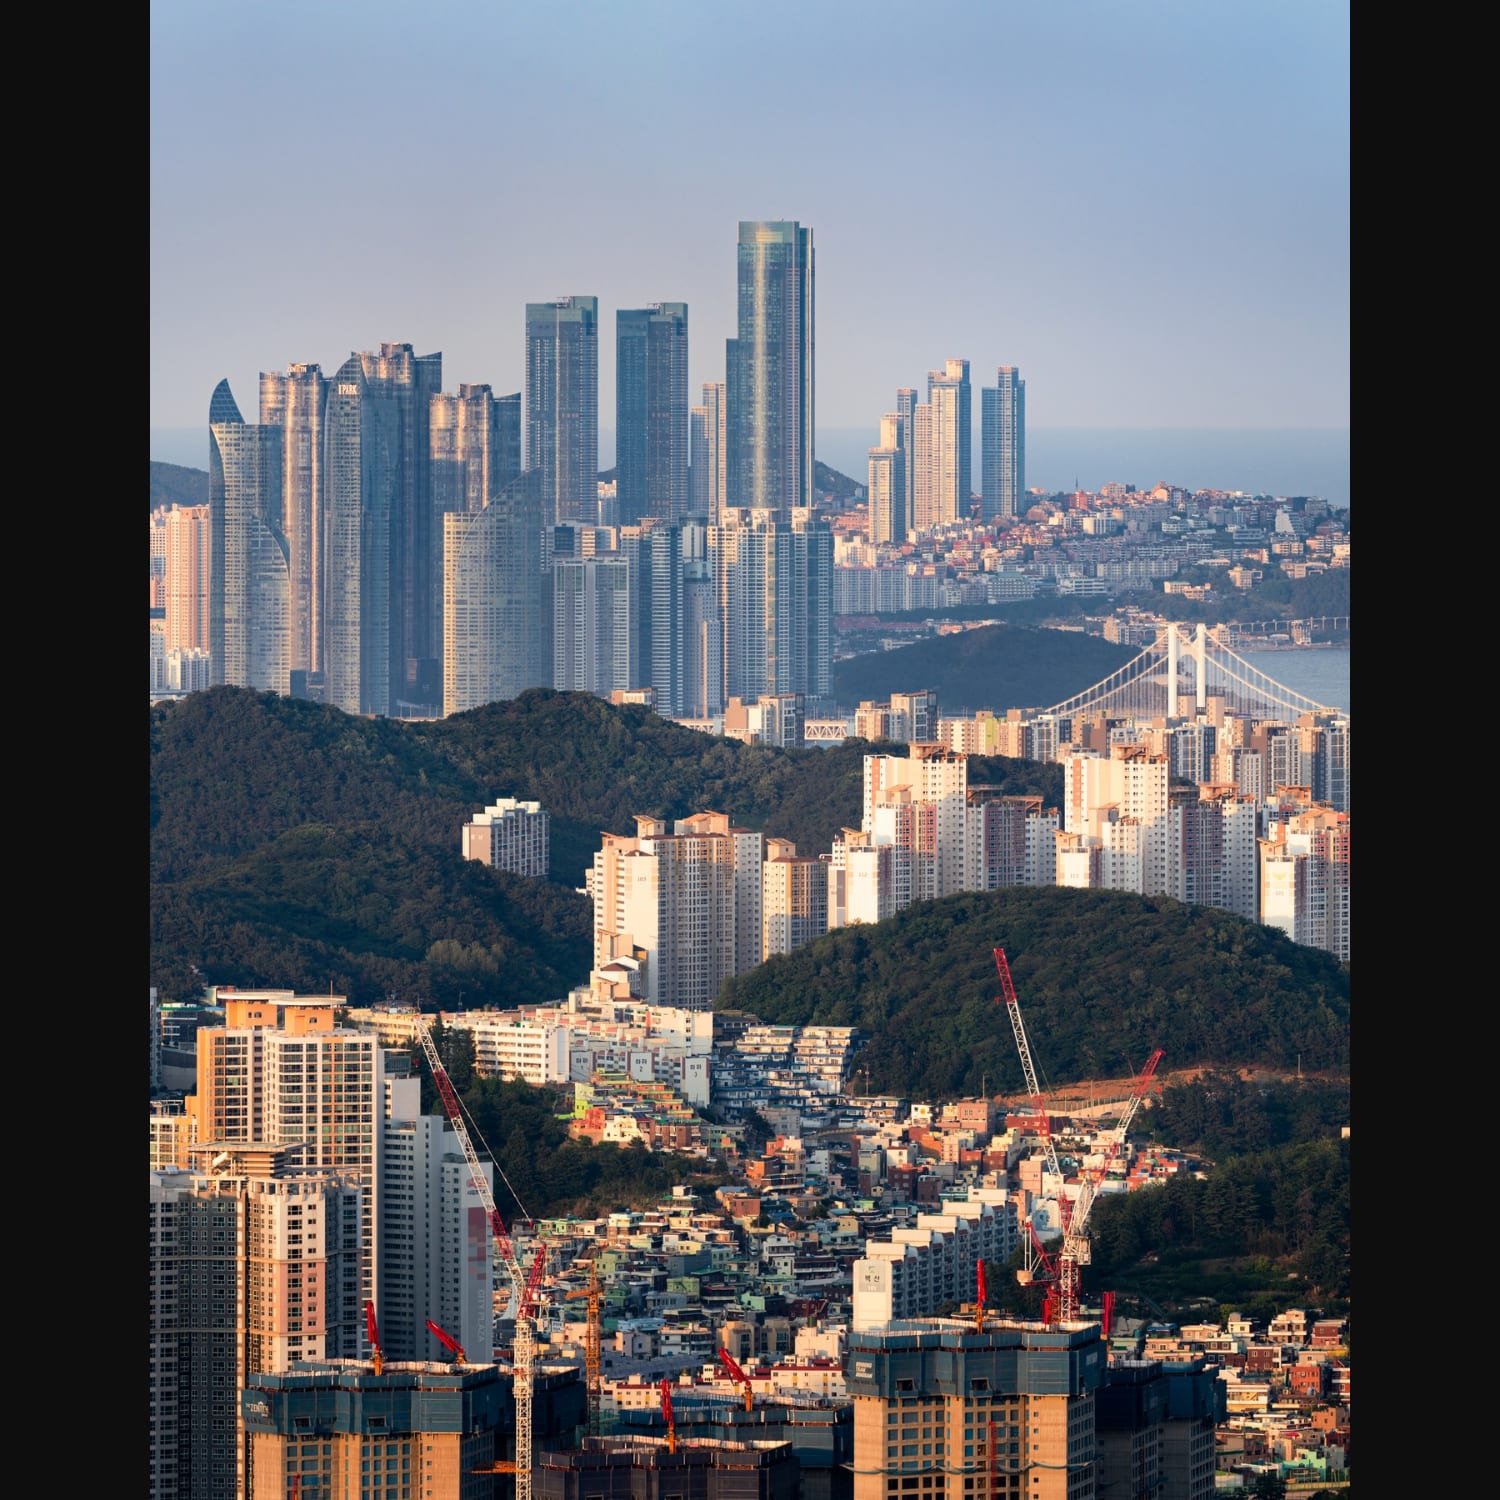 Densley packed high-rises and skyscrapers between mountains in Busan, South Korea.